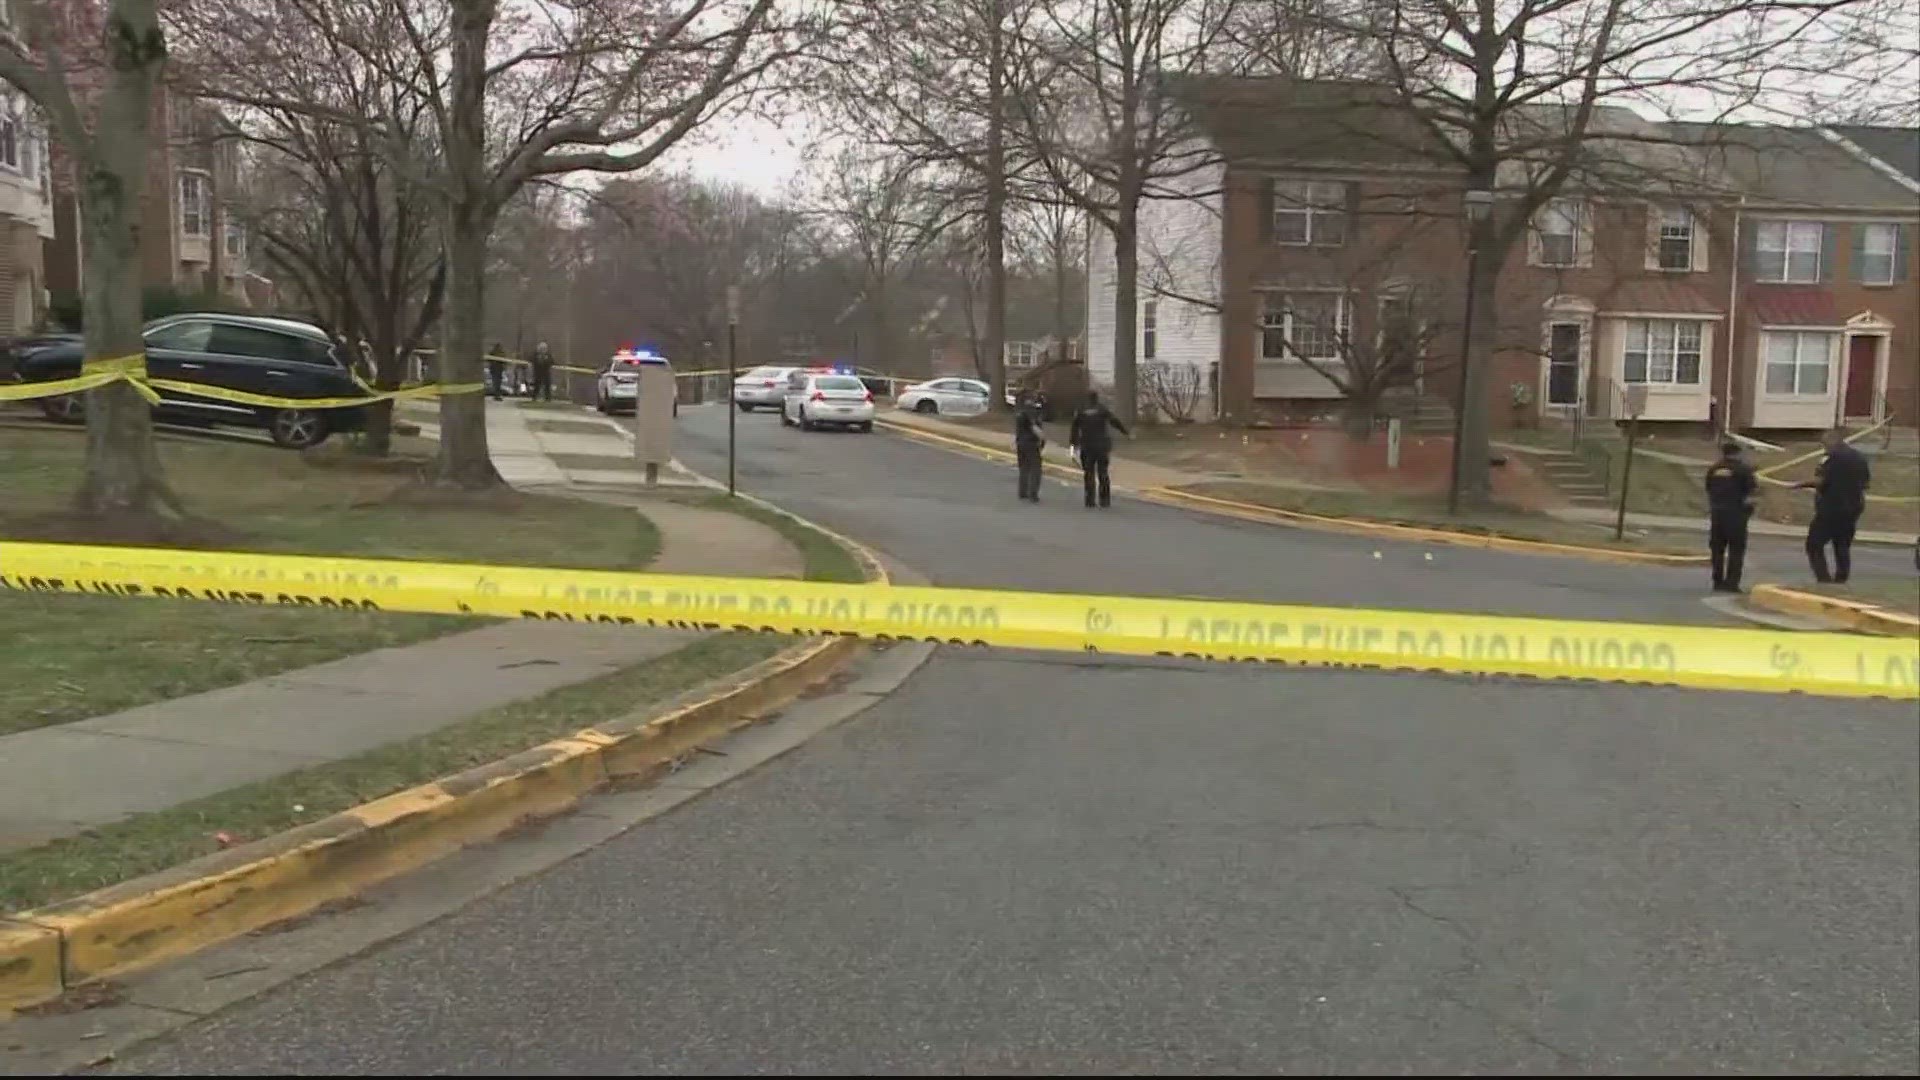 Police are investigating after a 15-year-old girl was shot in Laurel, Maryland Friday afternoon.